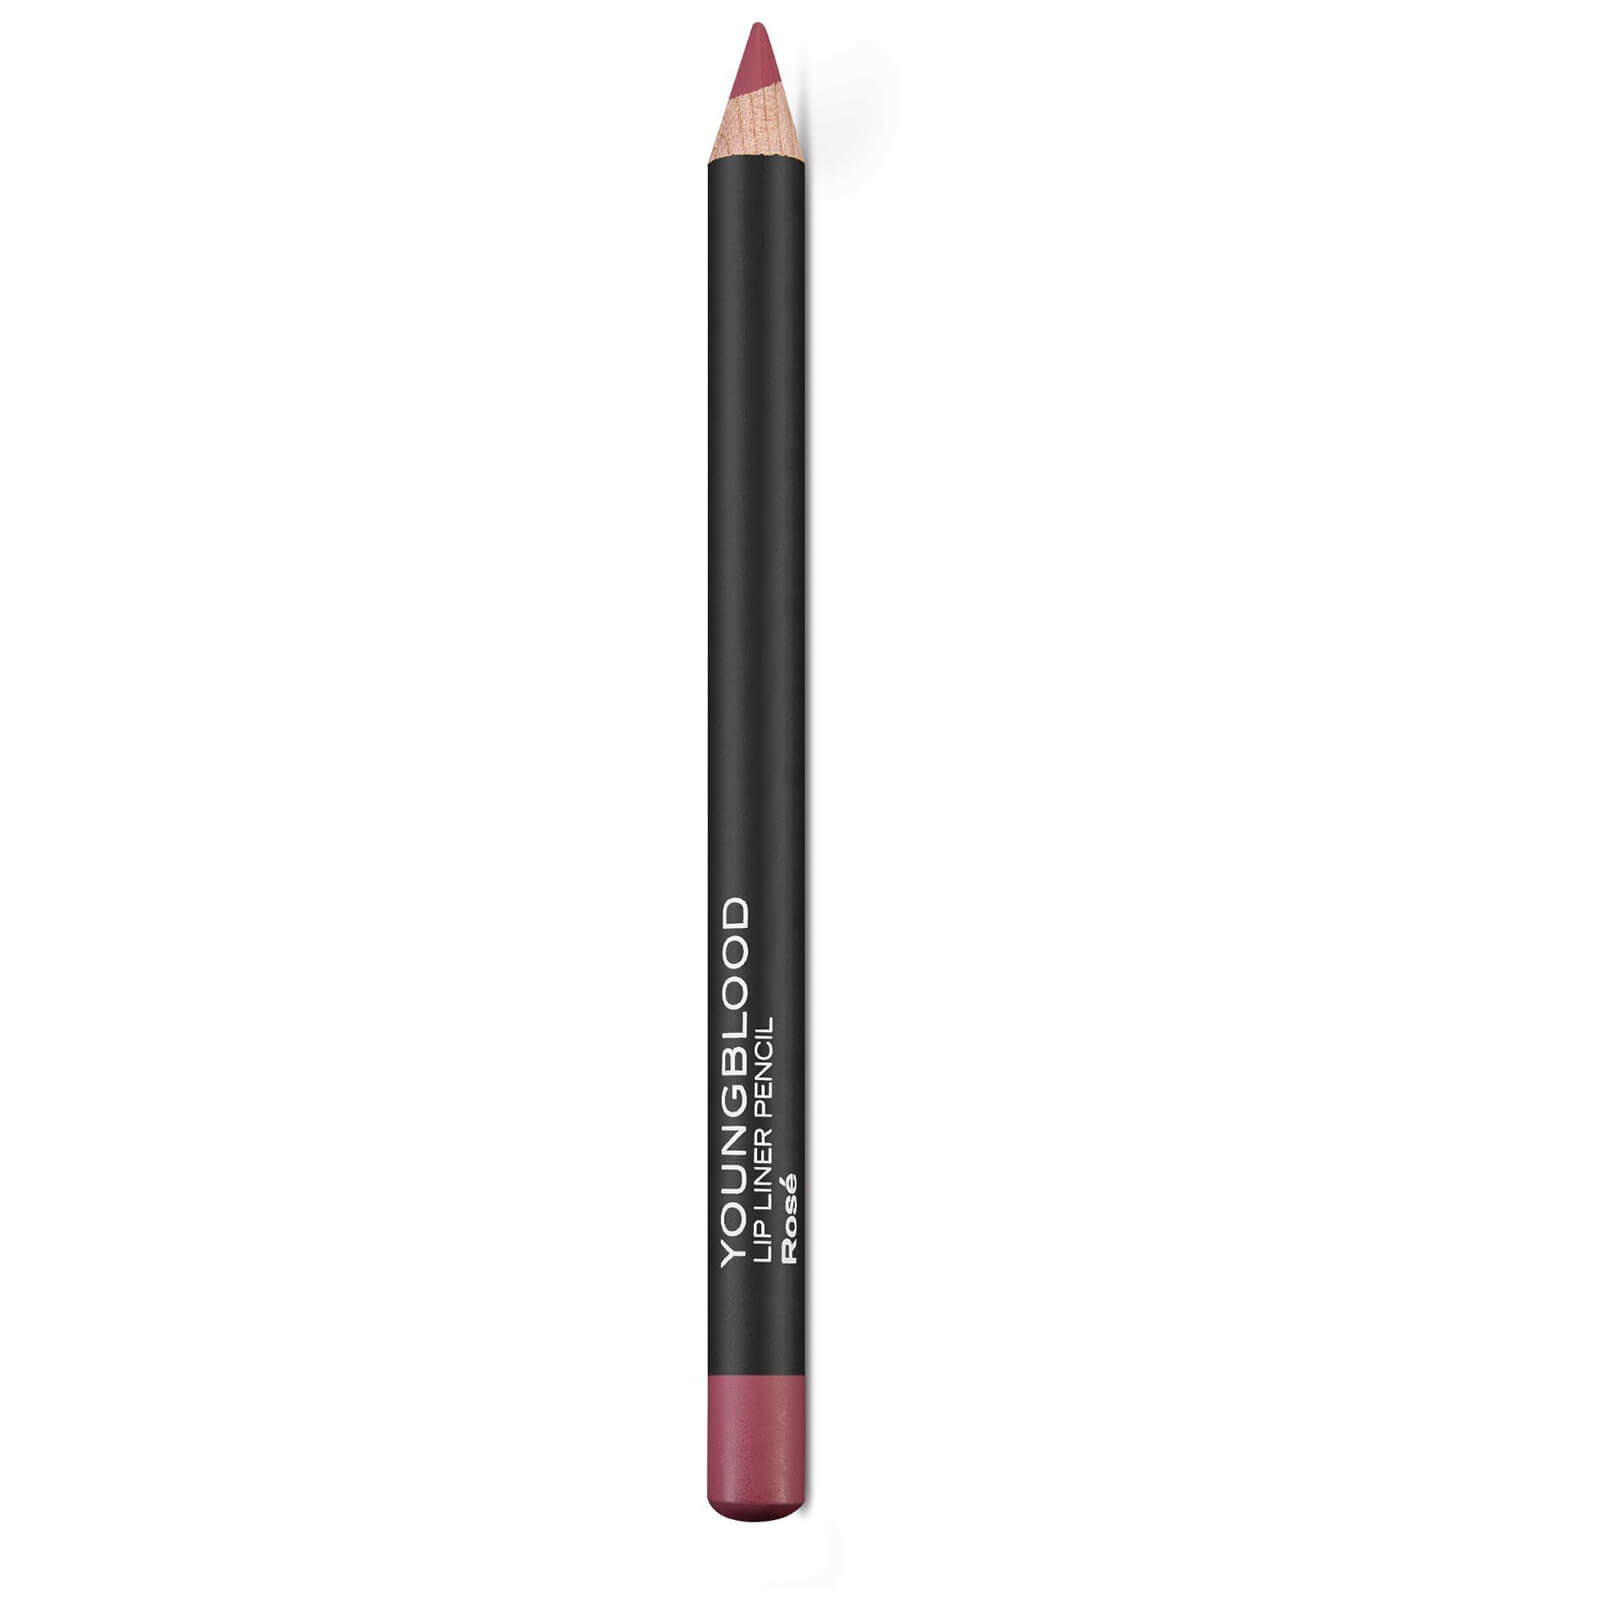 Youngblood Mineral Cosmetics Youngblood Lip Liner Pencil 1.1g (Various Shades) - Rose